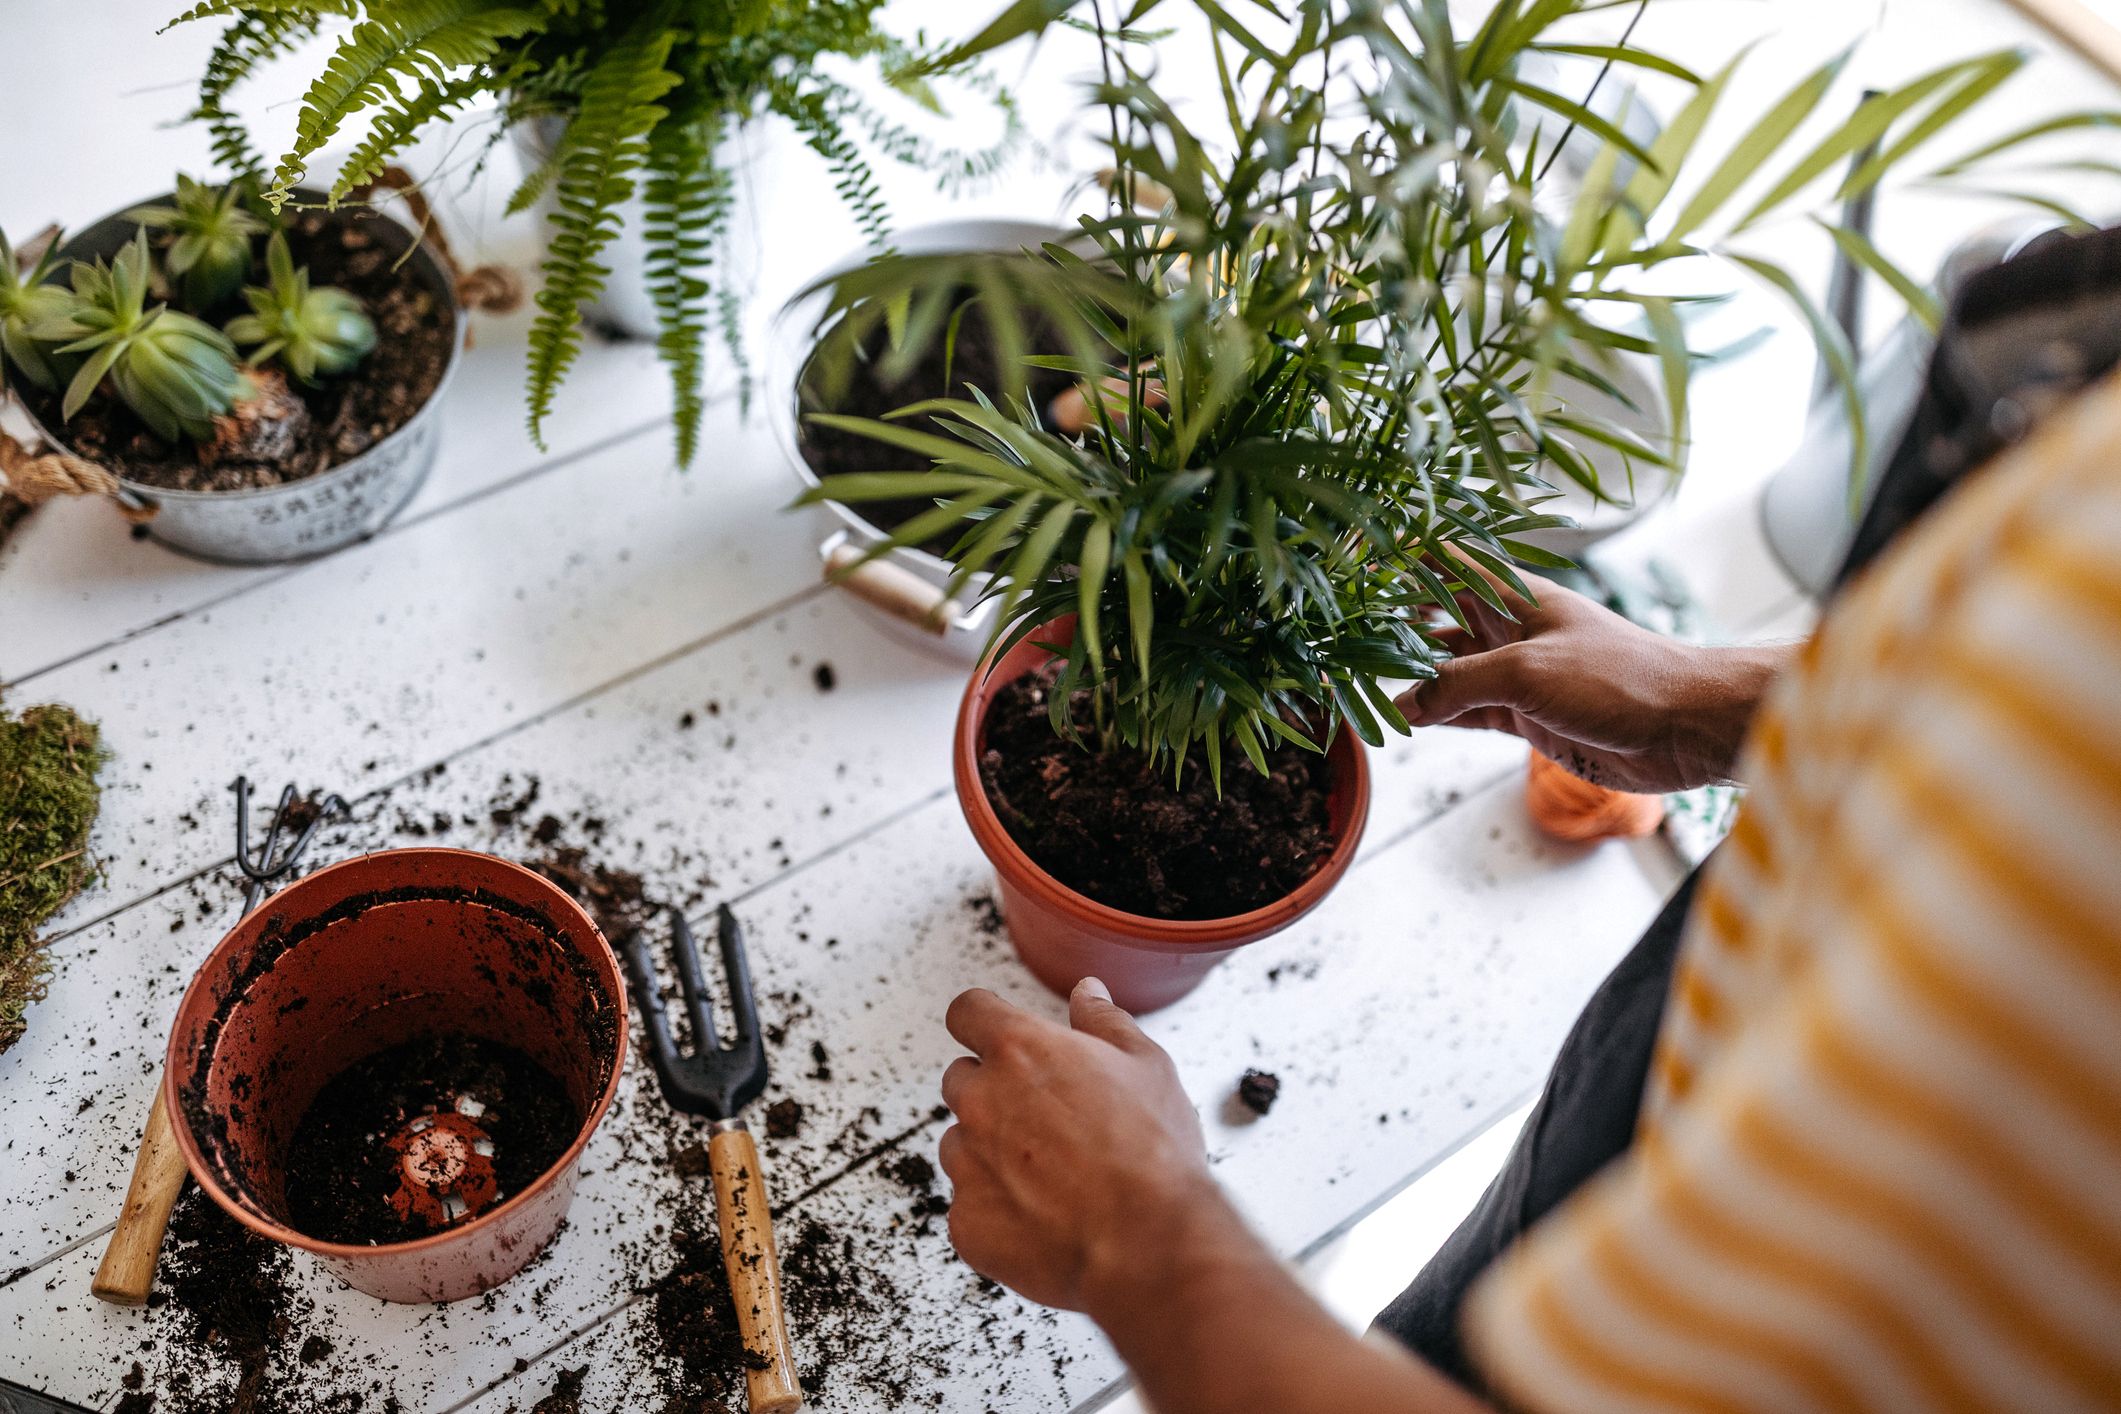 How To Repot A Plant - A Guide To Repotting Plants